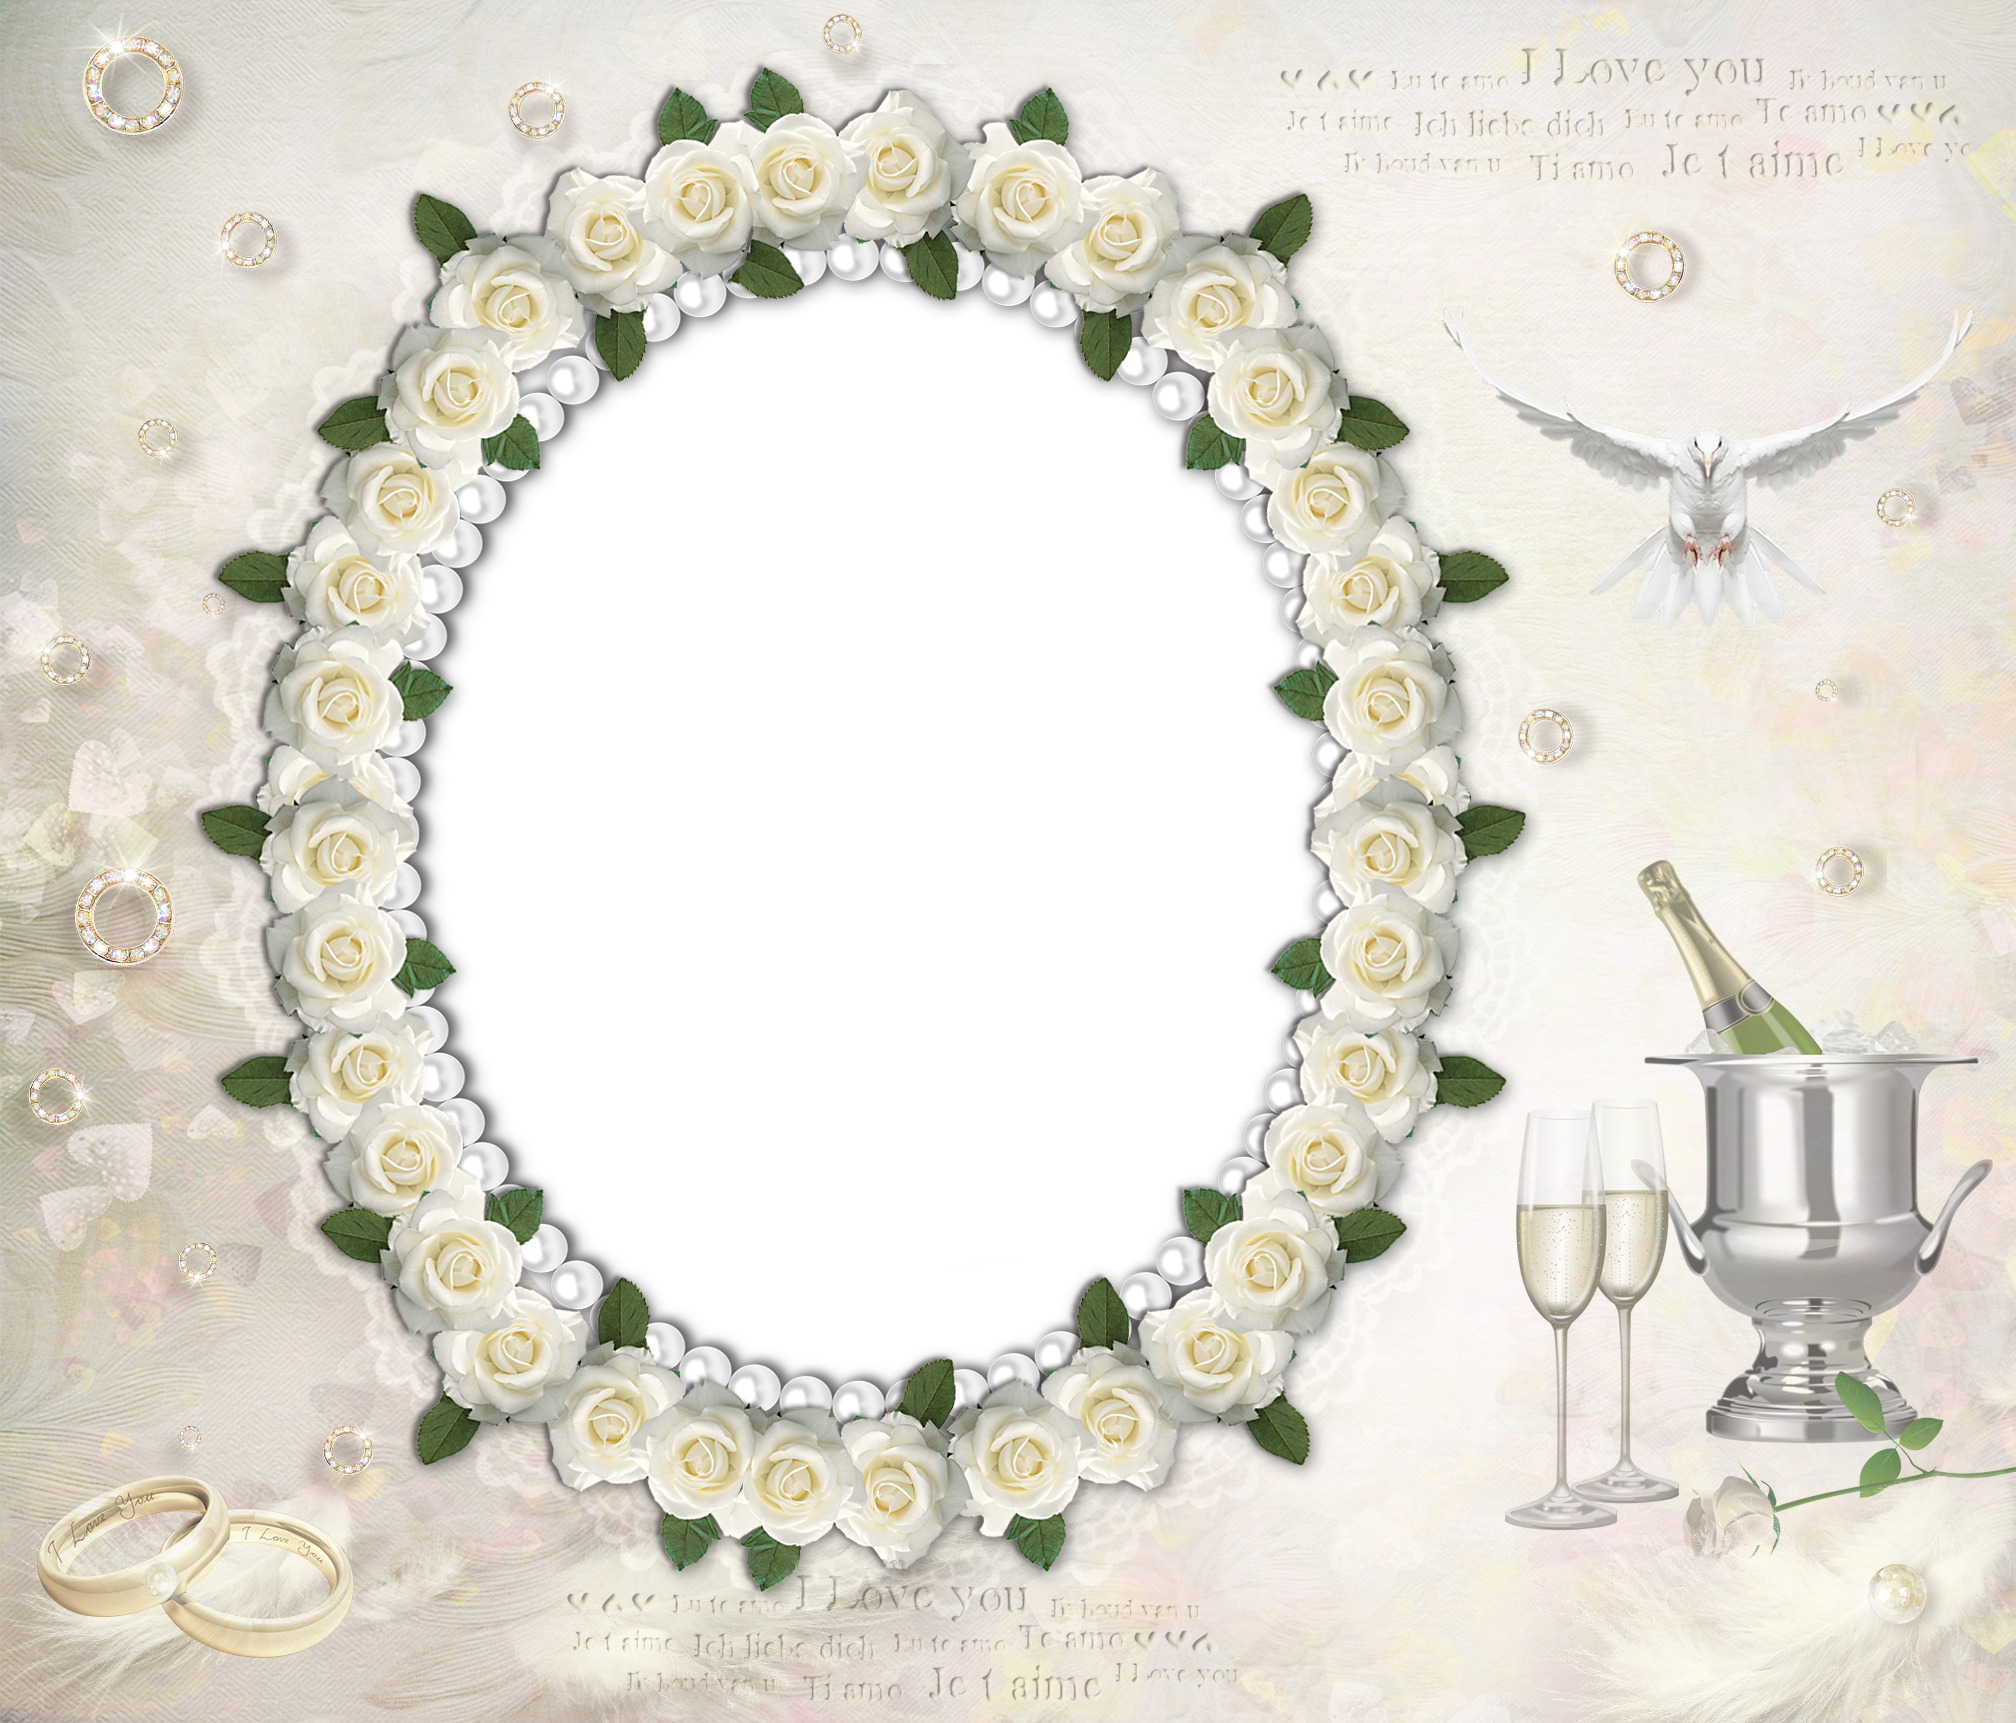 Transparent Wedding Frame with White Roses | Gallery Yopriceville - High-Quality ...2016 x 1723